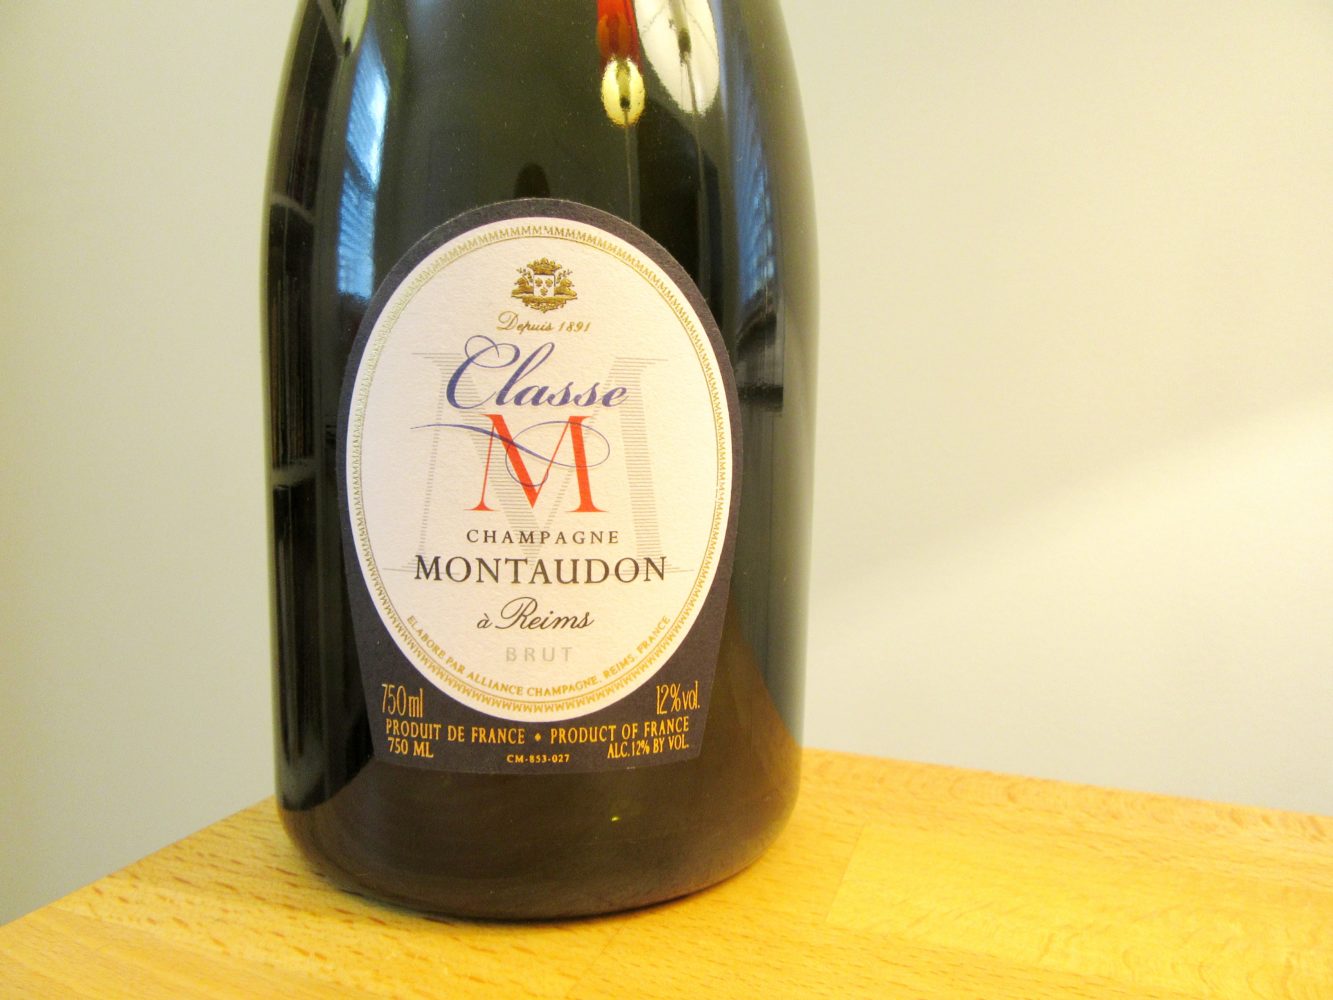 Photo Credit: Wine Casual, Montaudon, Classe M Brut, Champagne, France